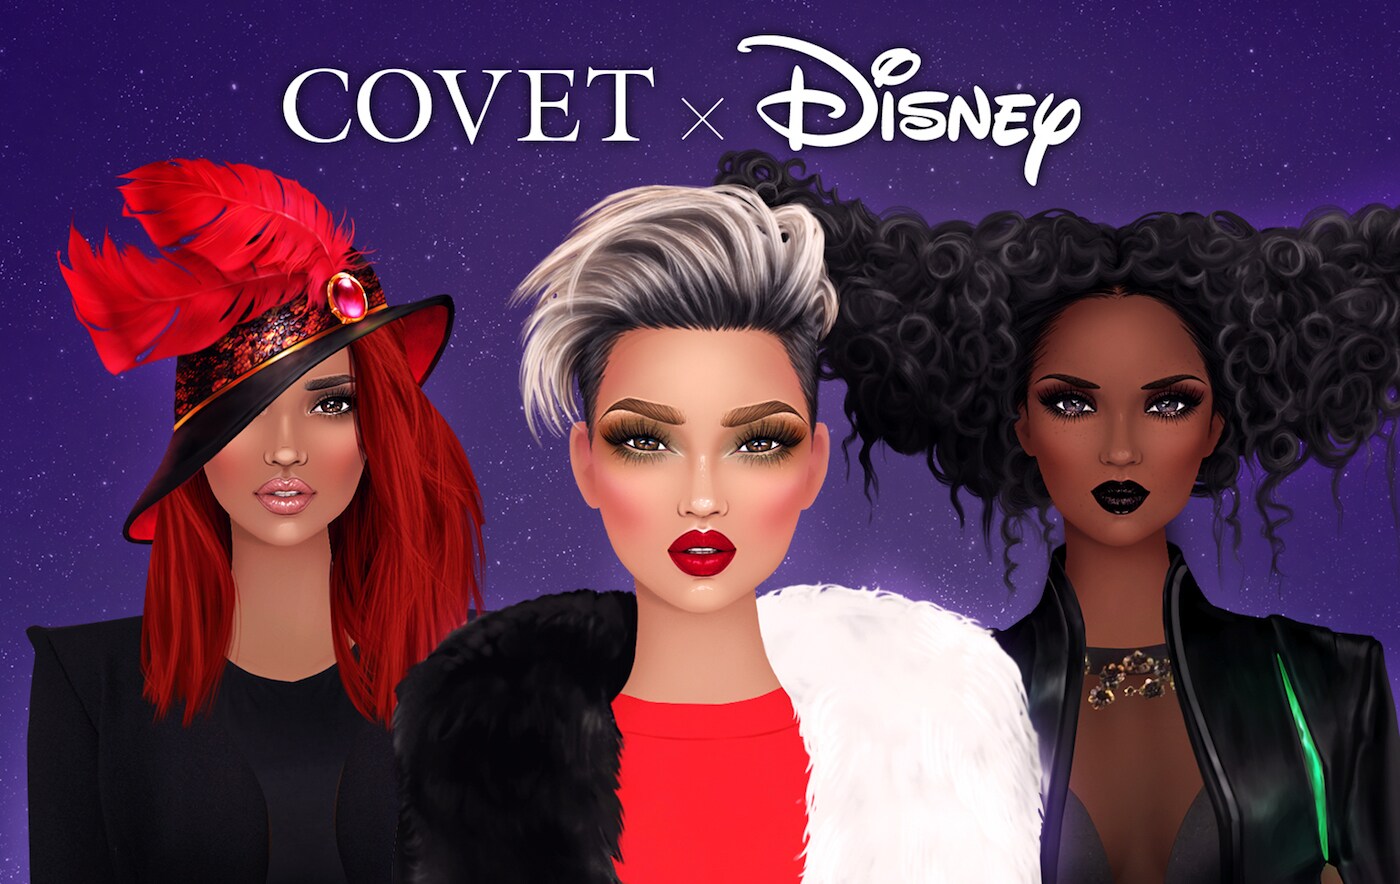 Covet x Disney villains dressed up in new styles